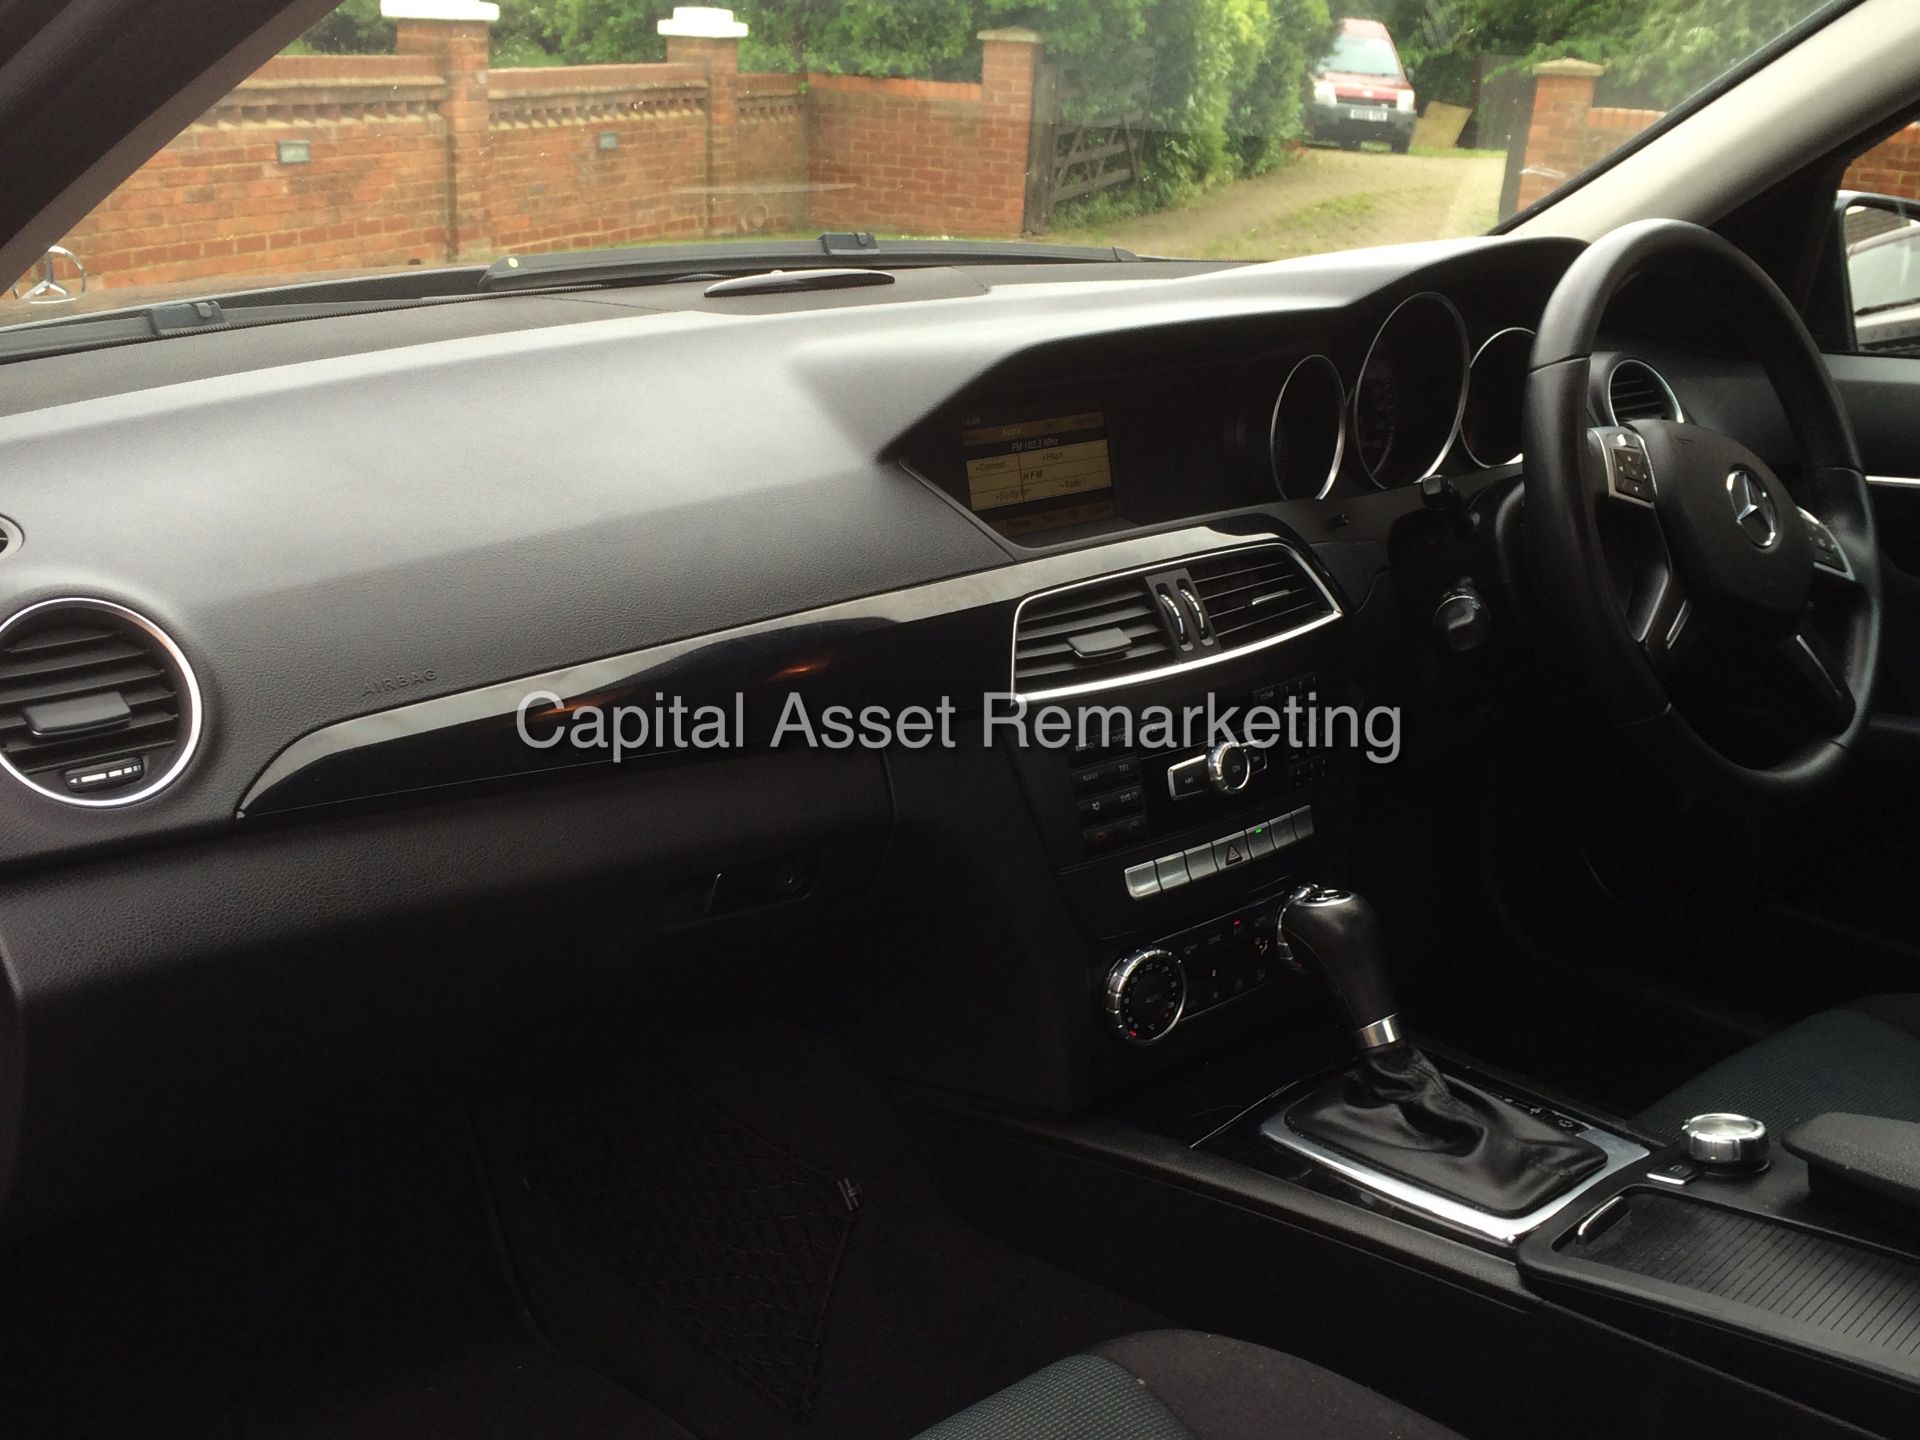 (ON SALE) MERCEDES C220CDI "SE EDITION" AUTO (12 REG) 1 OWNER - SAT NAV - AIR CON -CRUISE -ELEC PACK - Image 16 of 23